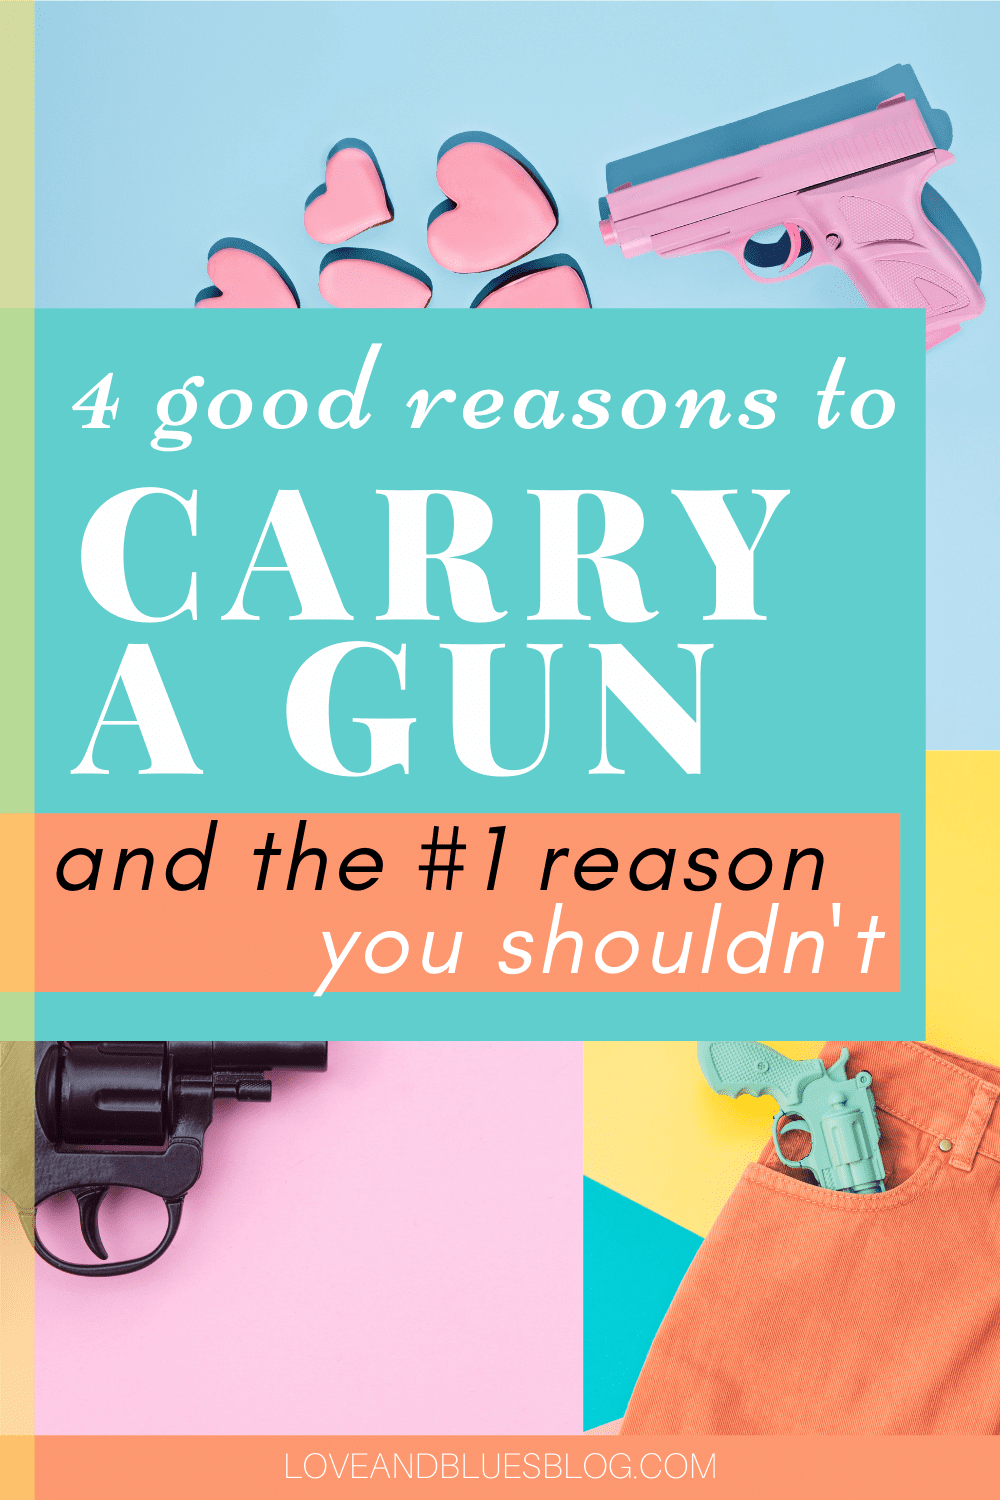 Love this! I've been on the fence about getting my concealed carry permit, but I'm gonna get it tomorrow. These are solid reasons to carry a gun.